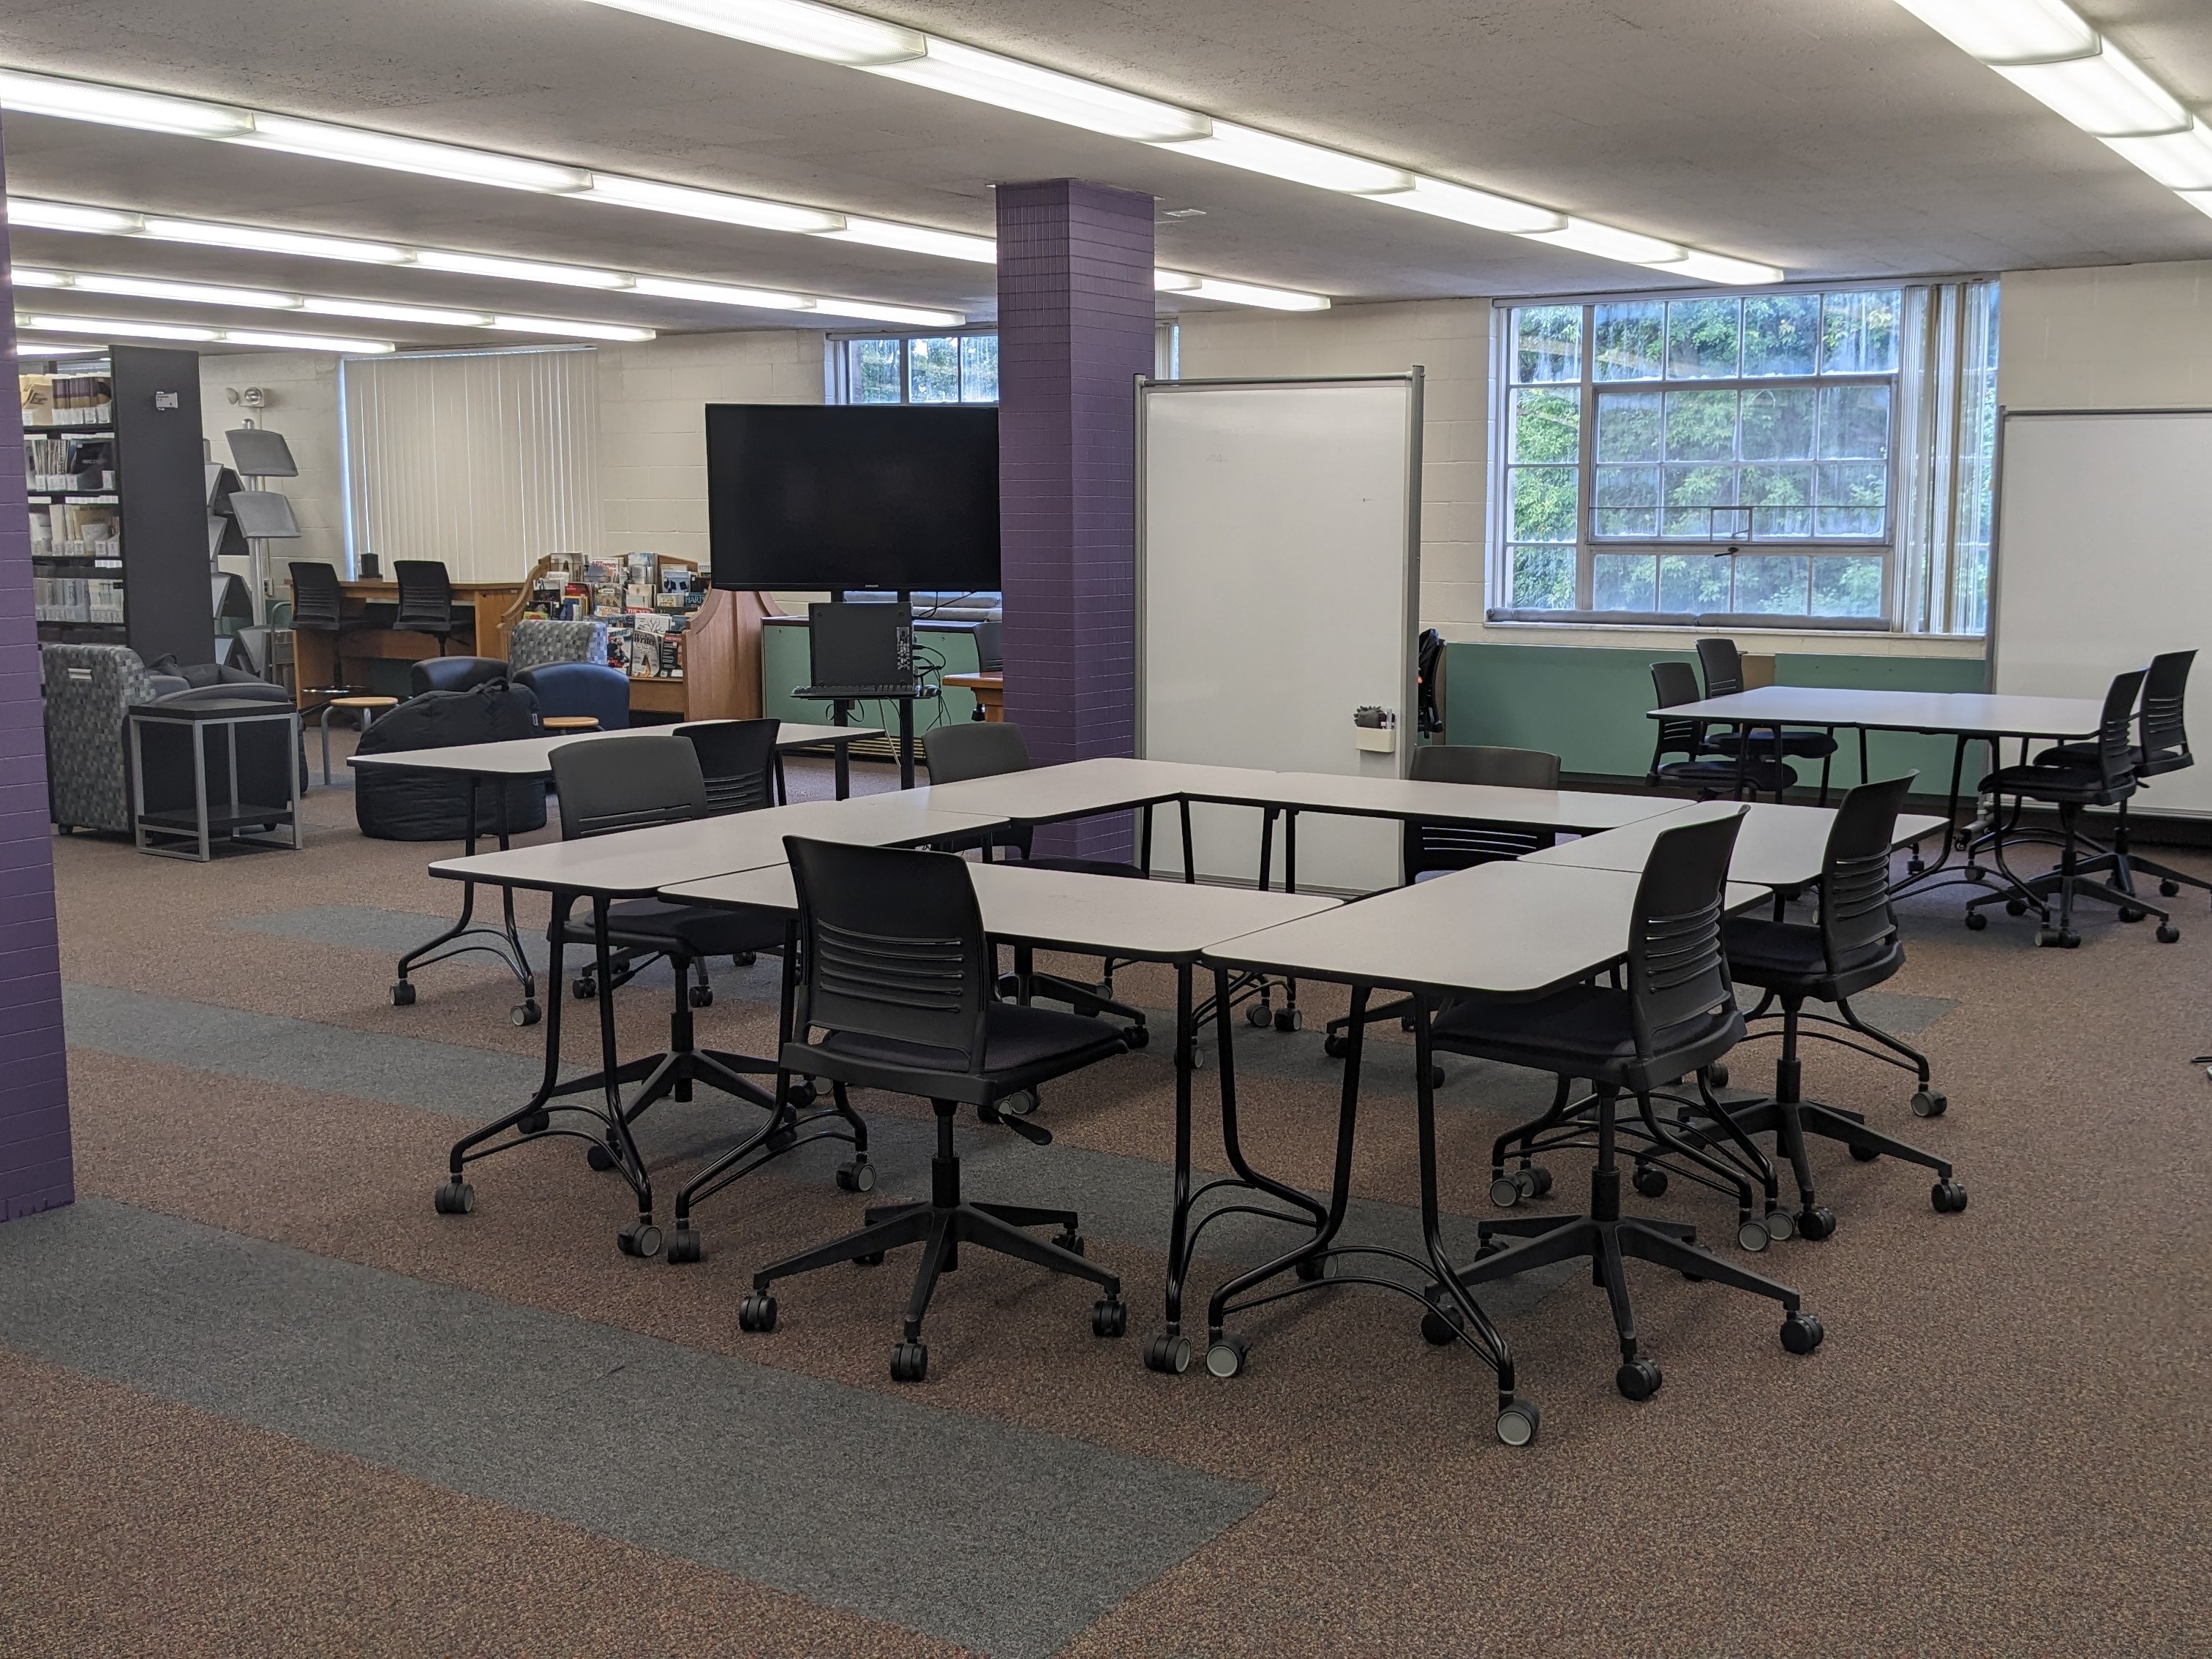 Tables, chairs, and whiteboards in this space are on wheels -- arrange the furniture to make your perfect study space